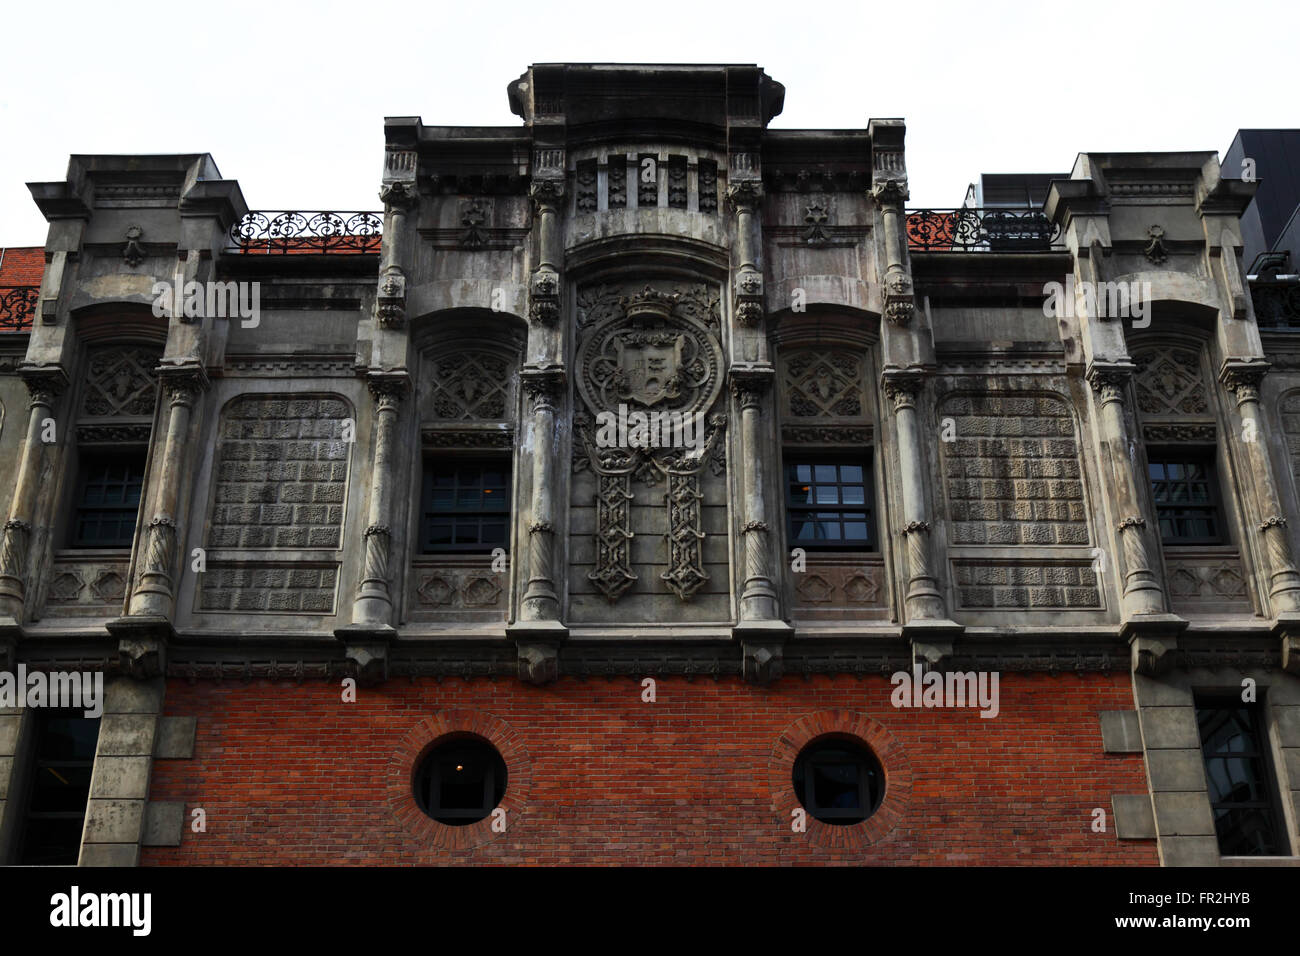 Side wall of the Alhondiga building with Bilbao coat of arms, Bilbao, Basque Country, Spain Stock Photo